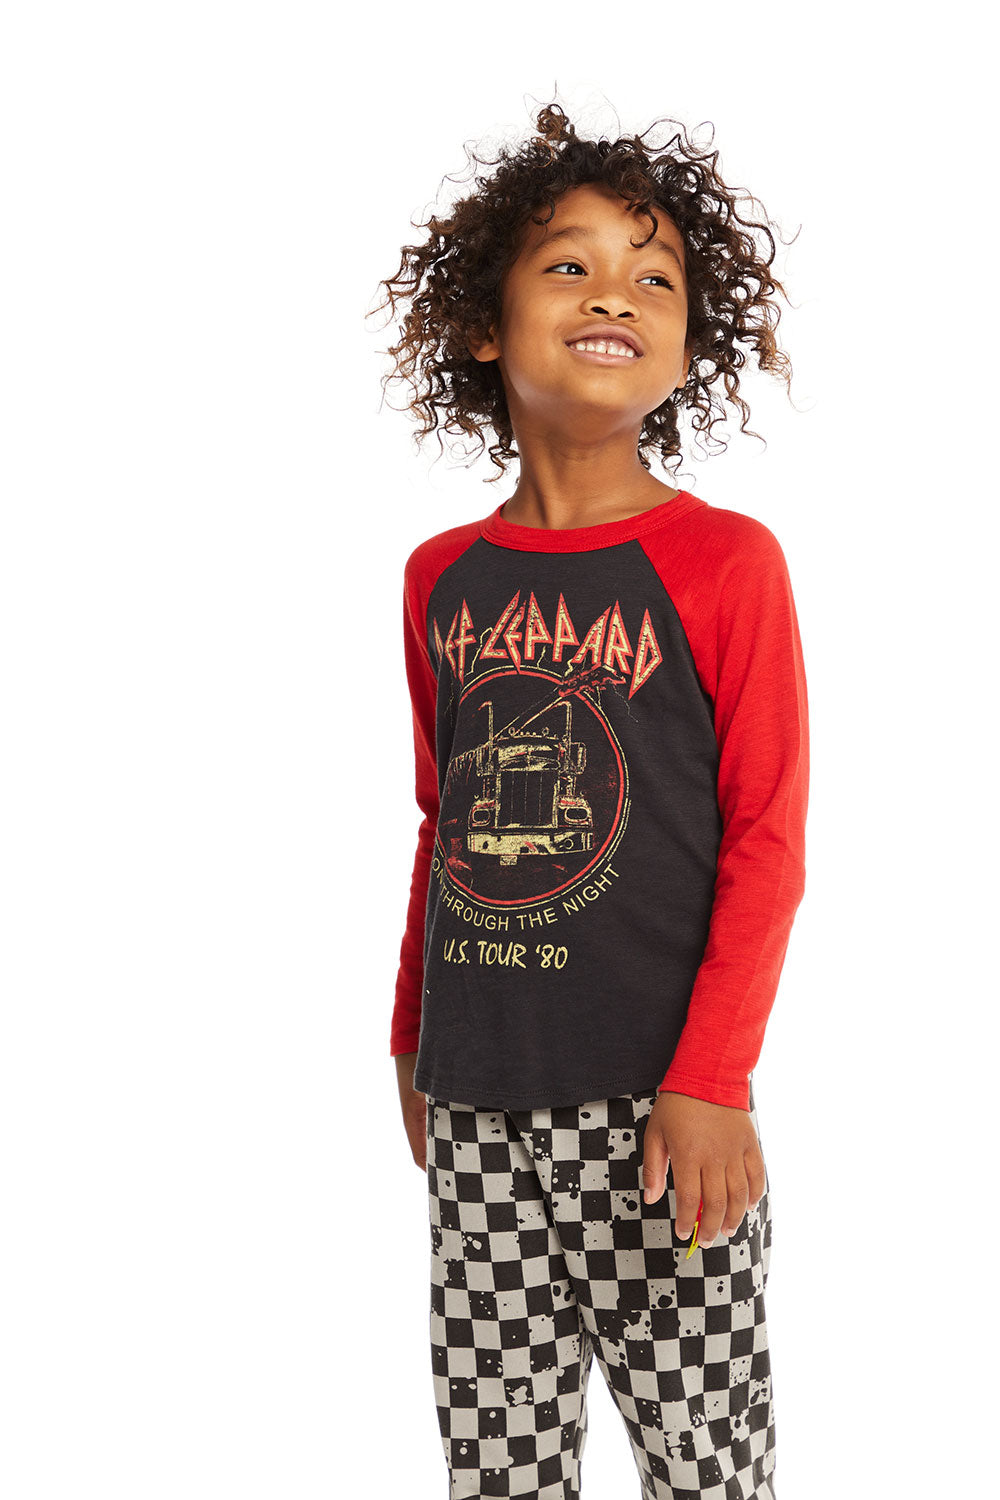 Def Leppard On Through The Night Long Sleeve BOYS chaserbrand